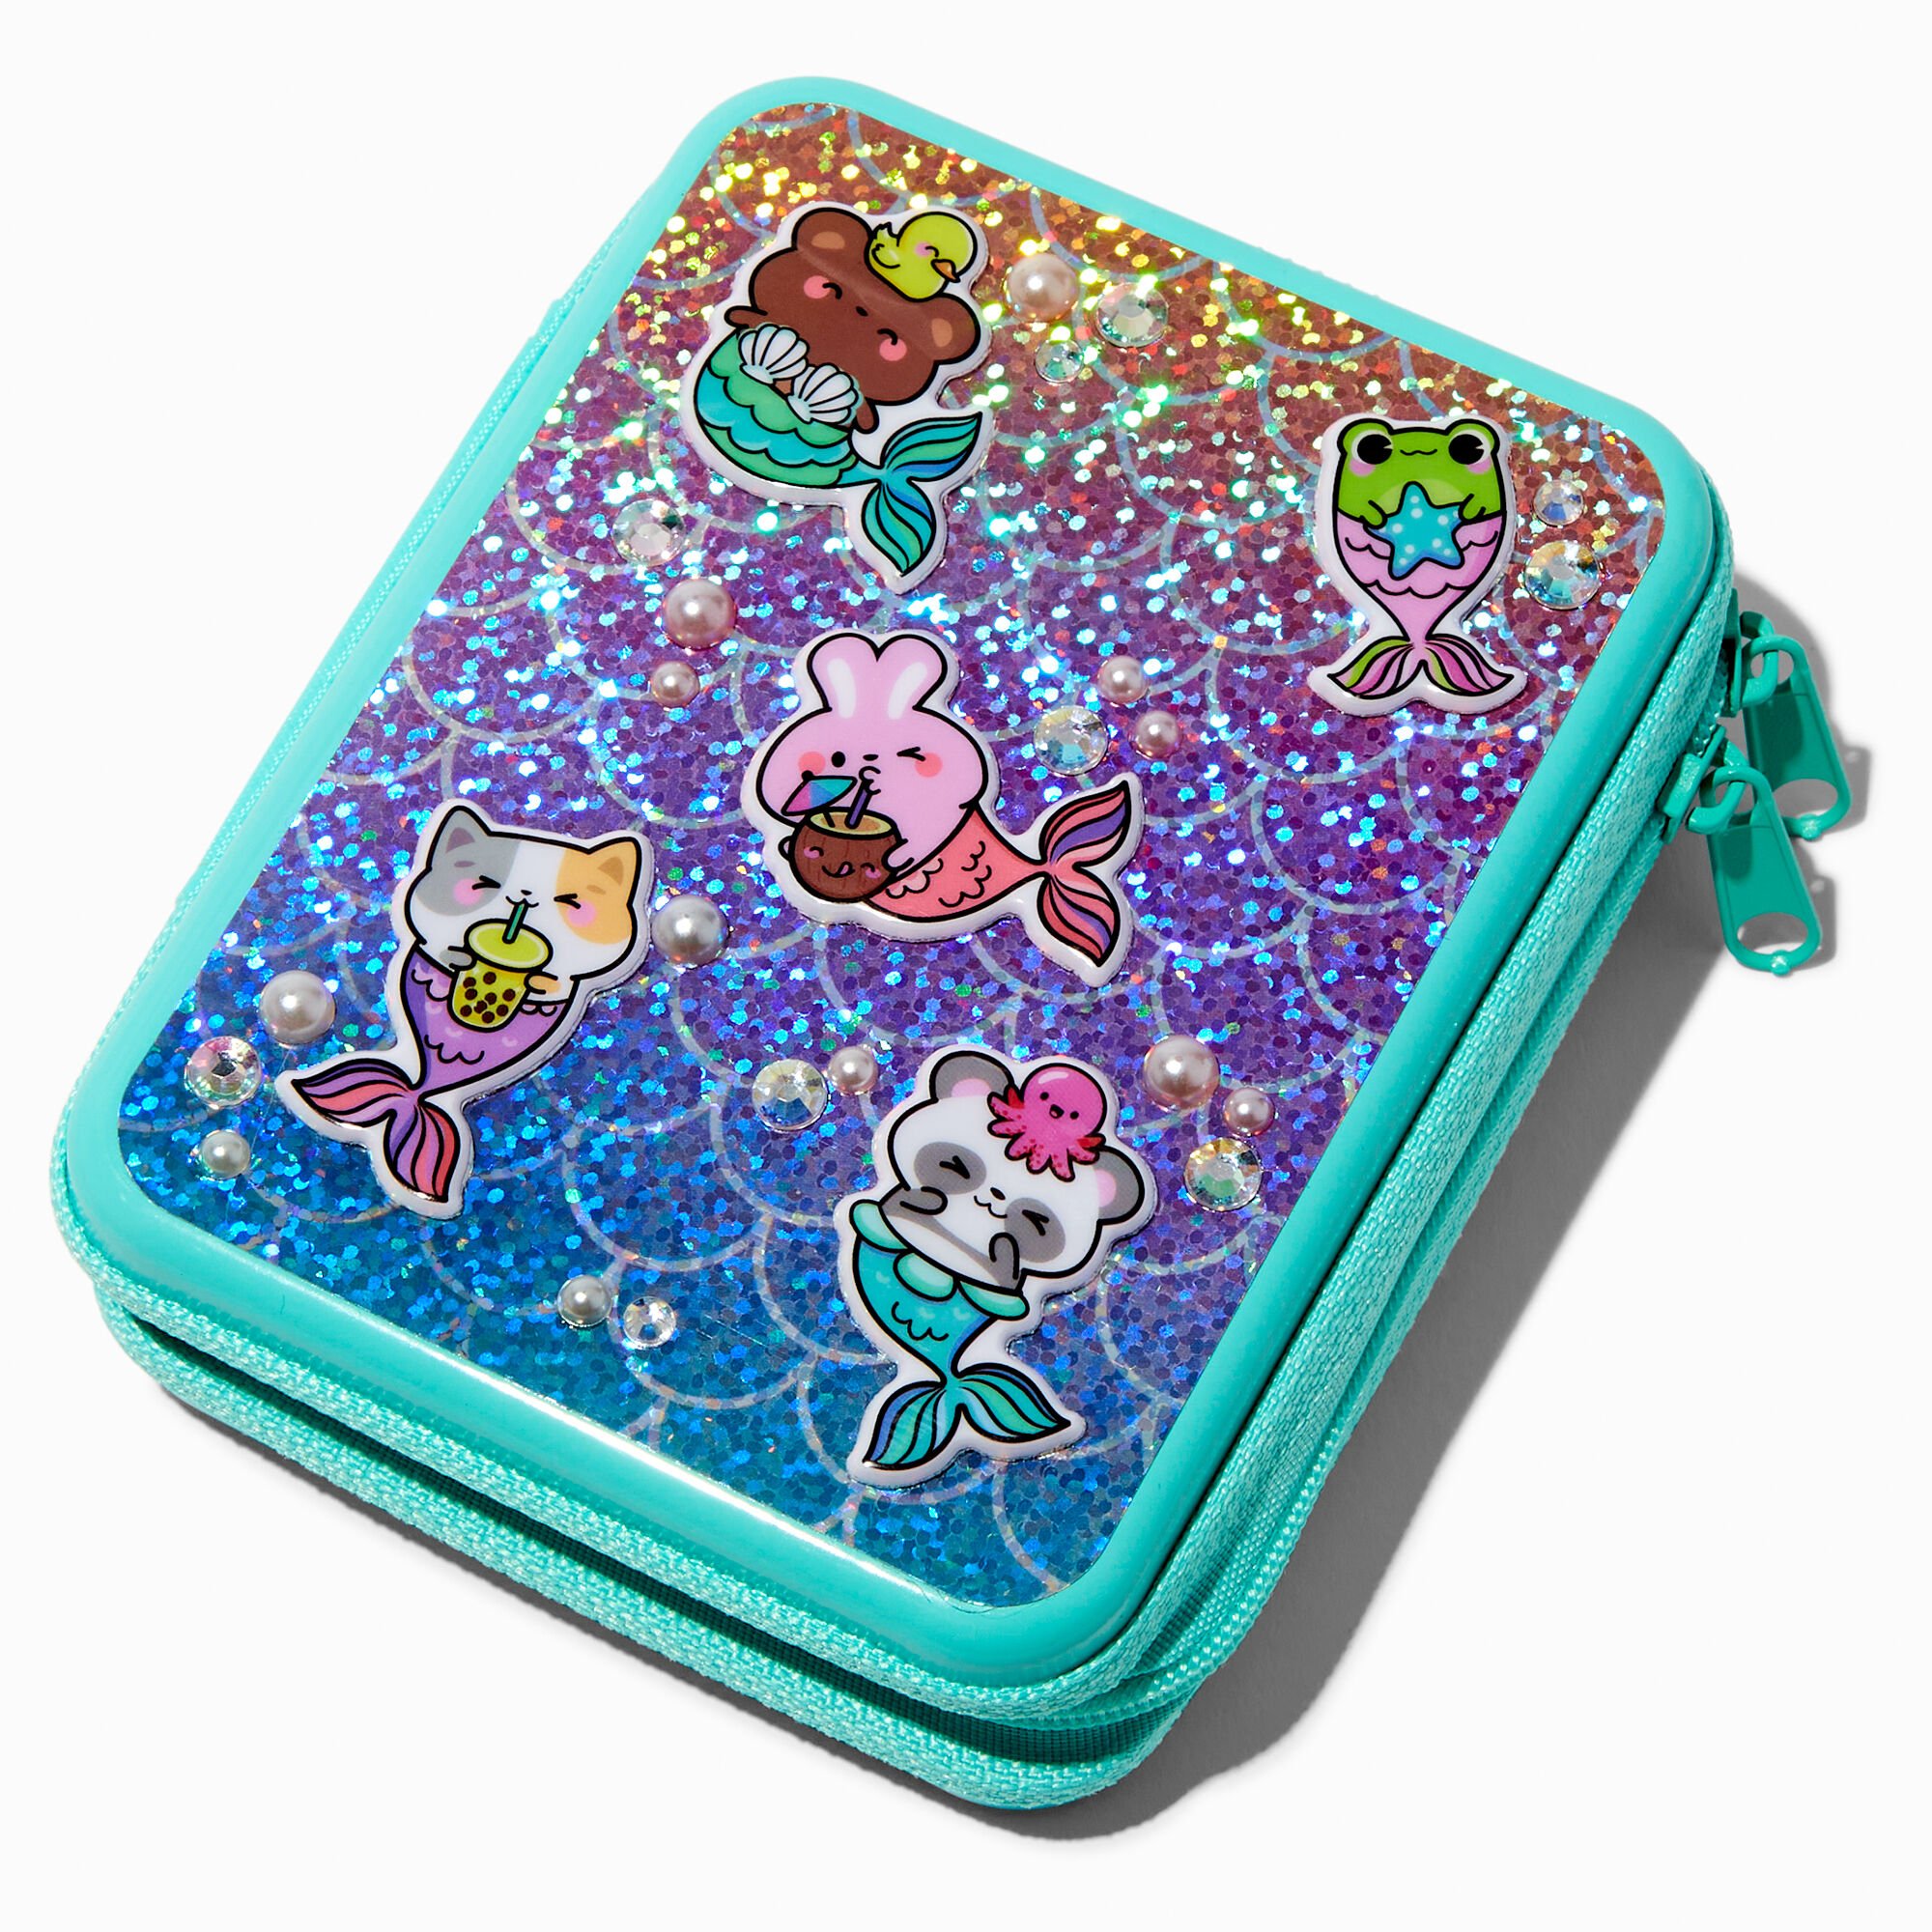 View Claires Mermaid Critter Bling Makeup Tin Rainbow information